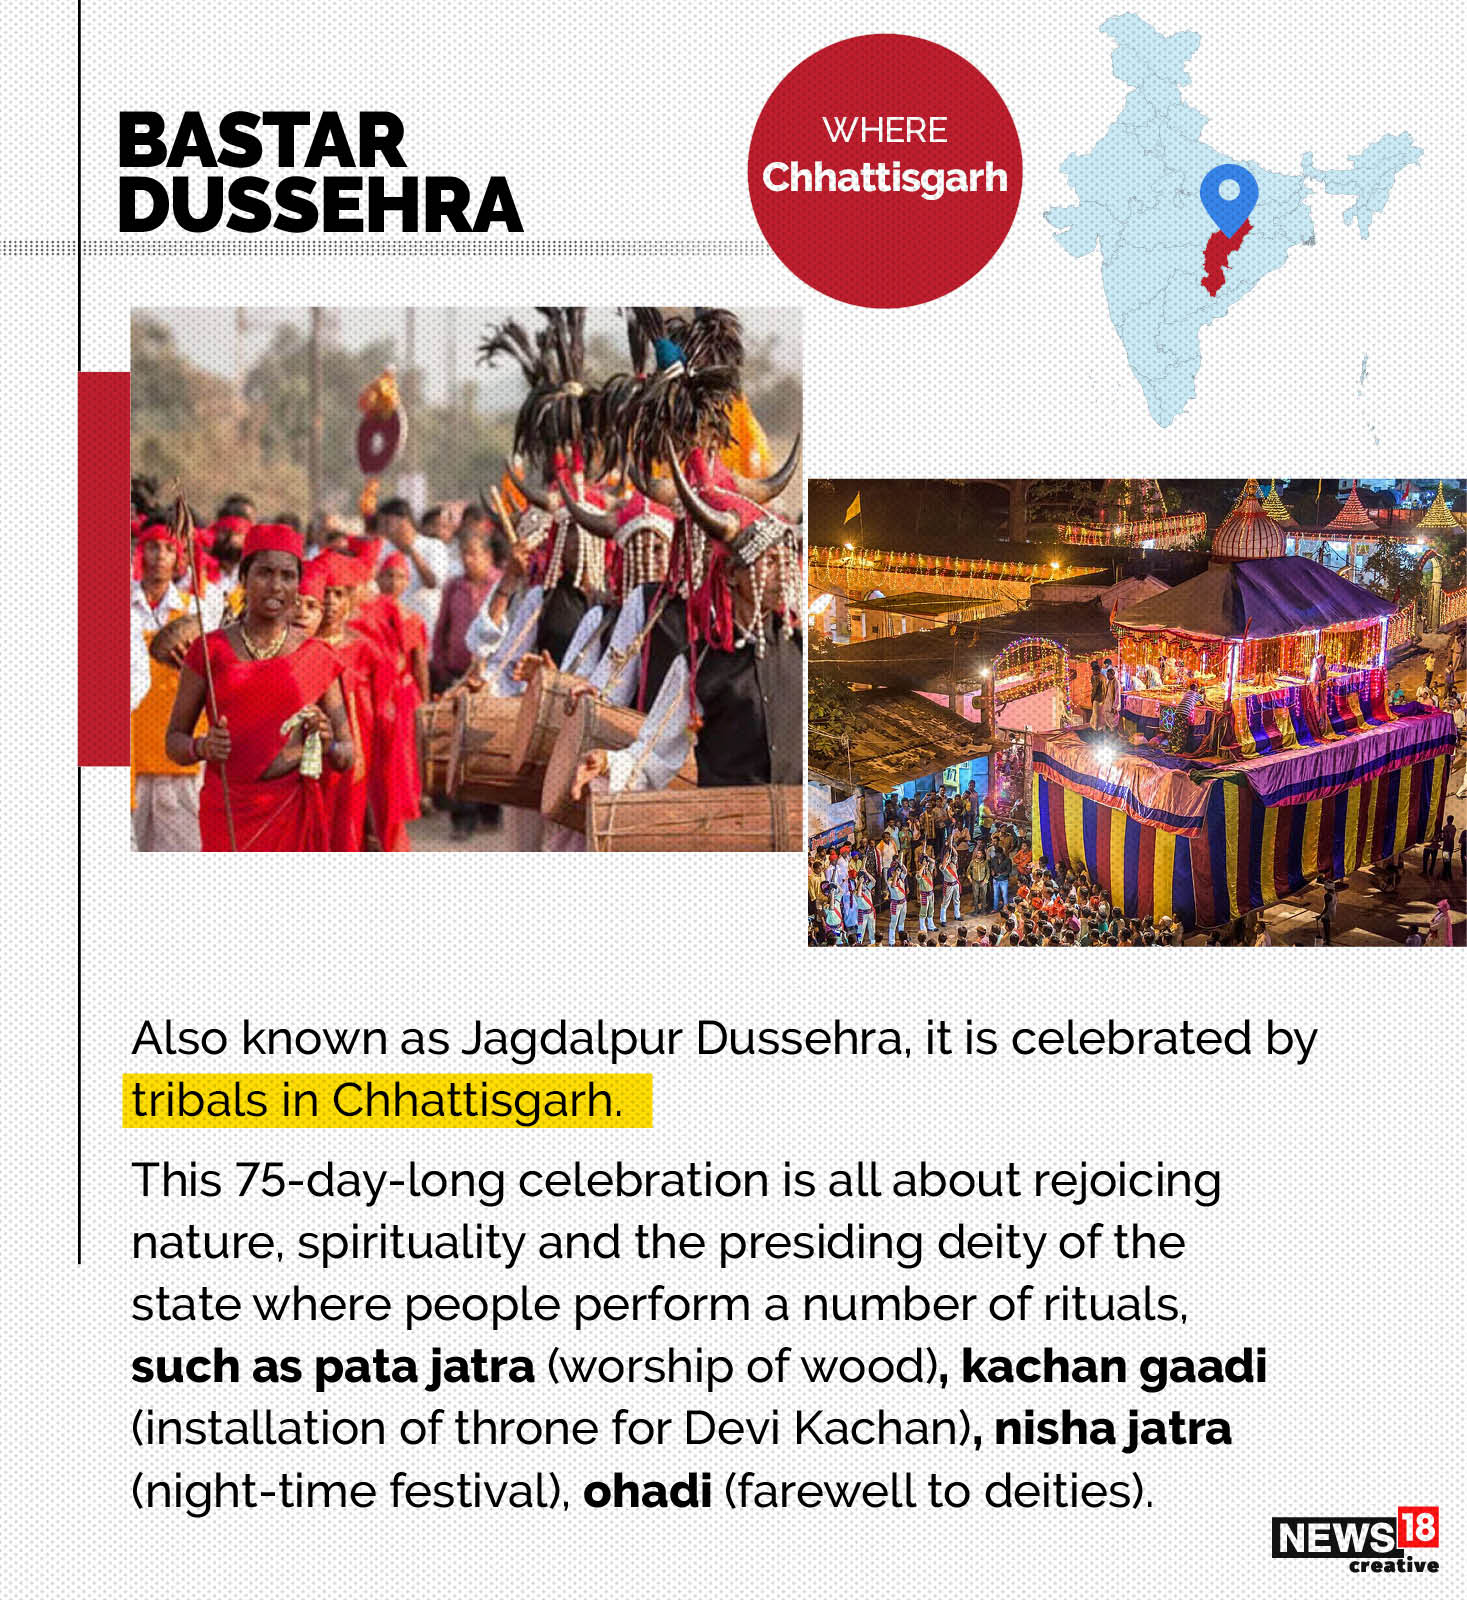 Bastar Dussehra, also known as Jagdalpur Dussehra, is celebrated by tribals in Chhattisgarh. (Image: news18 Creative)